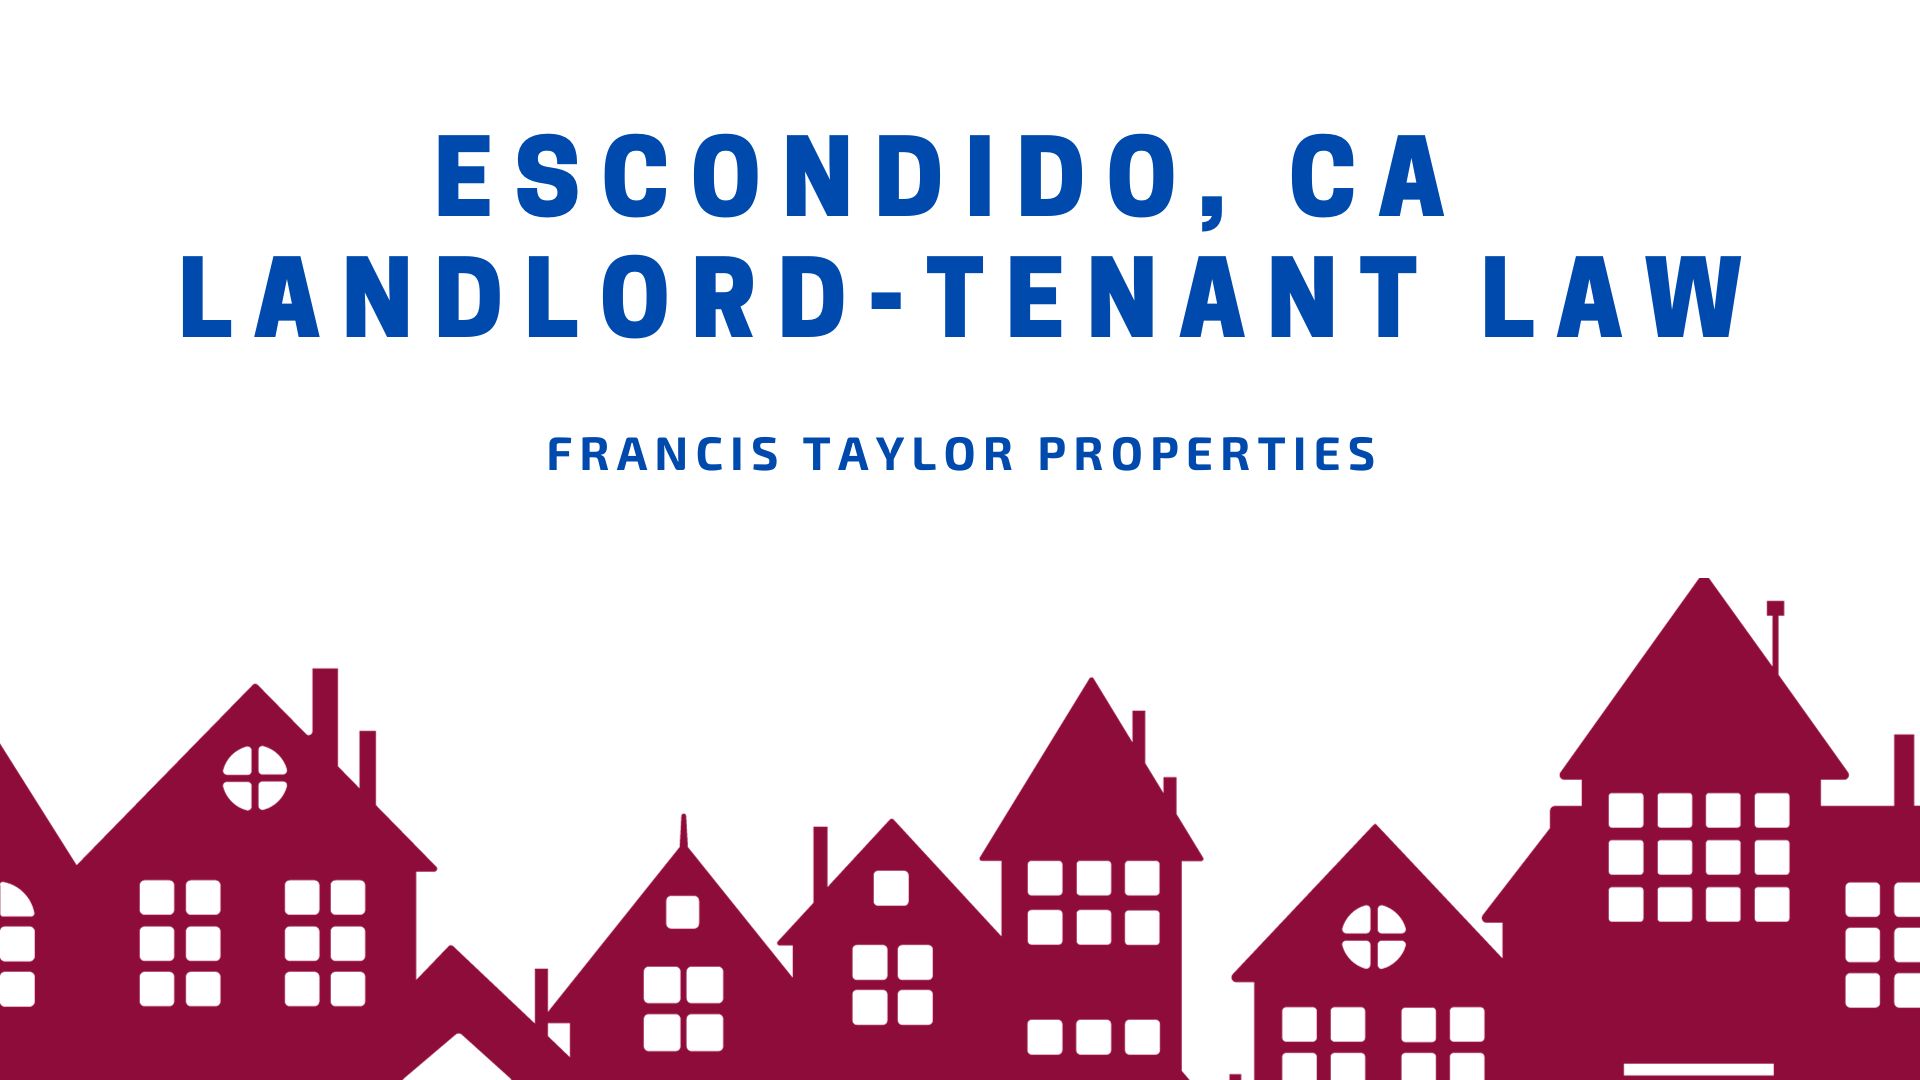 California Rental Laws - An Overview of Landlord Tenant Rights